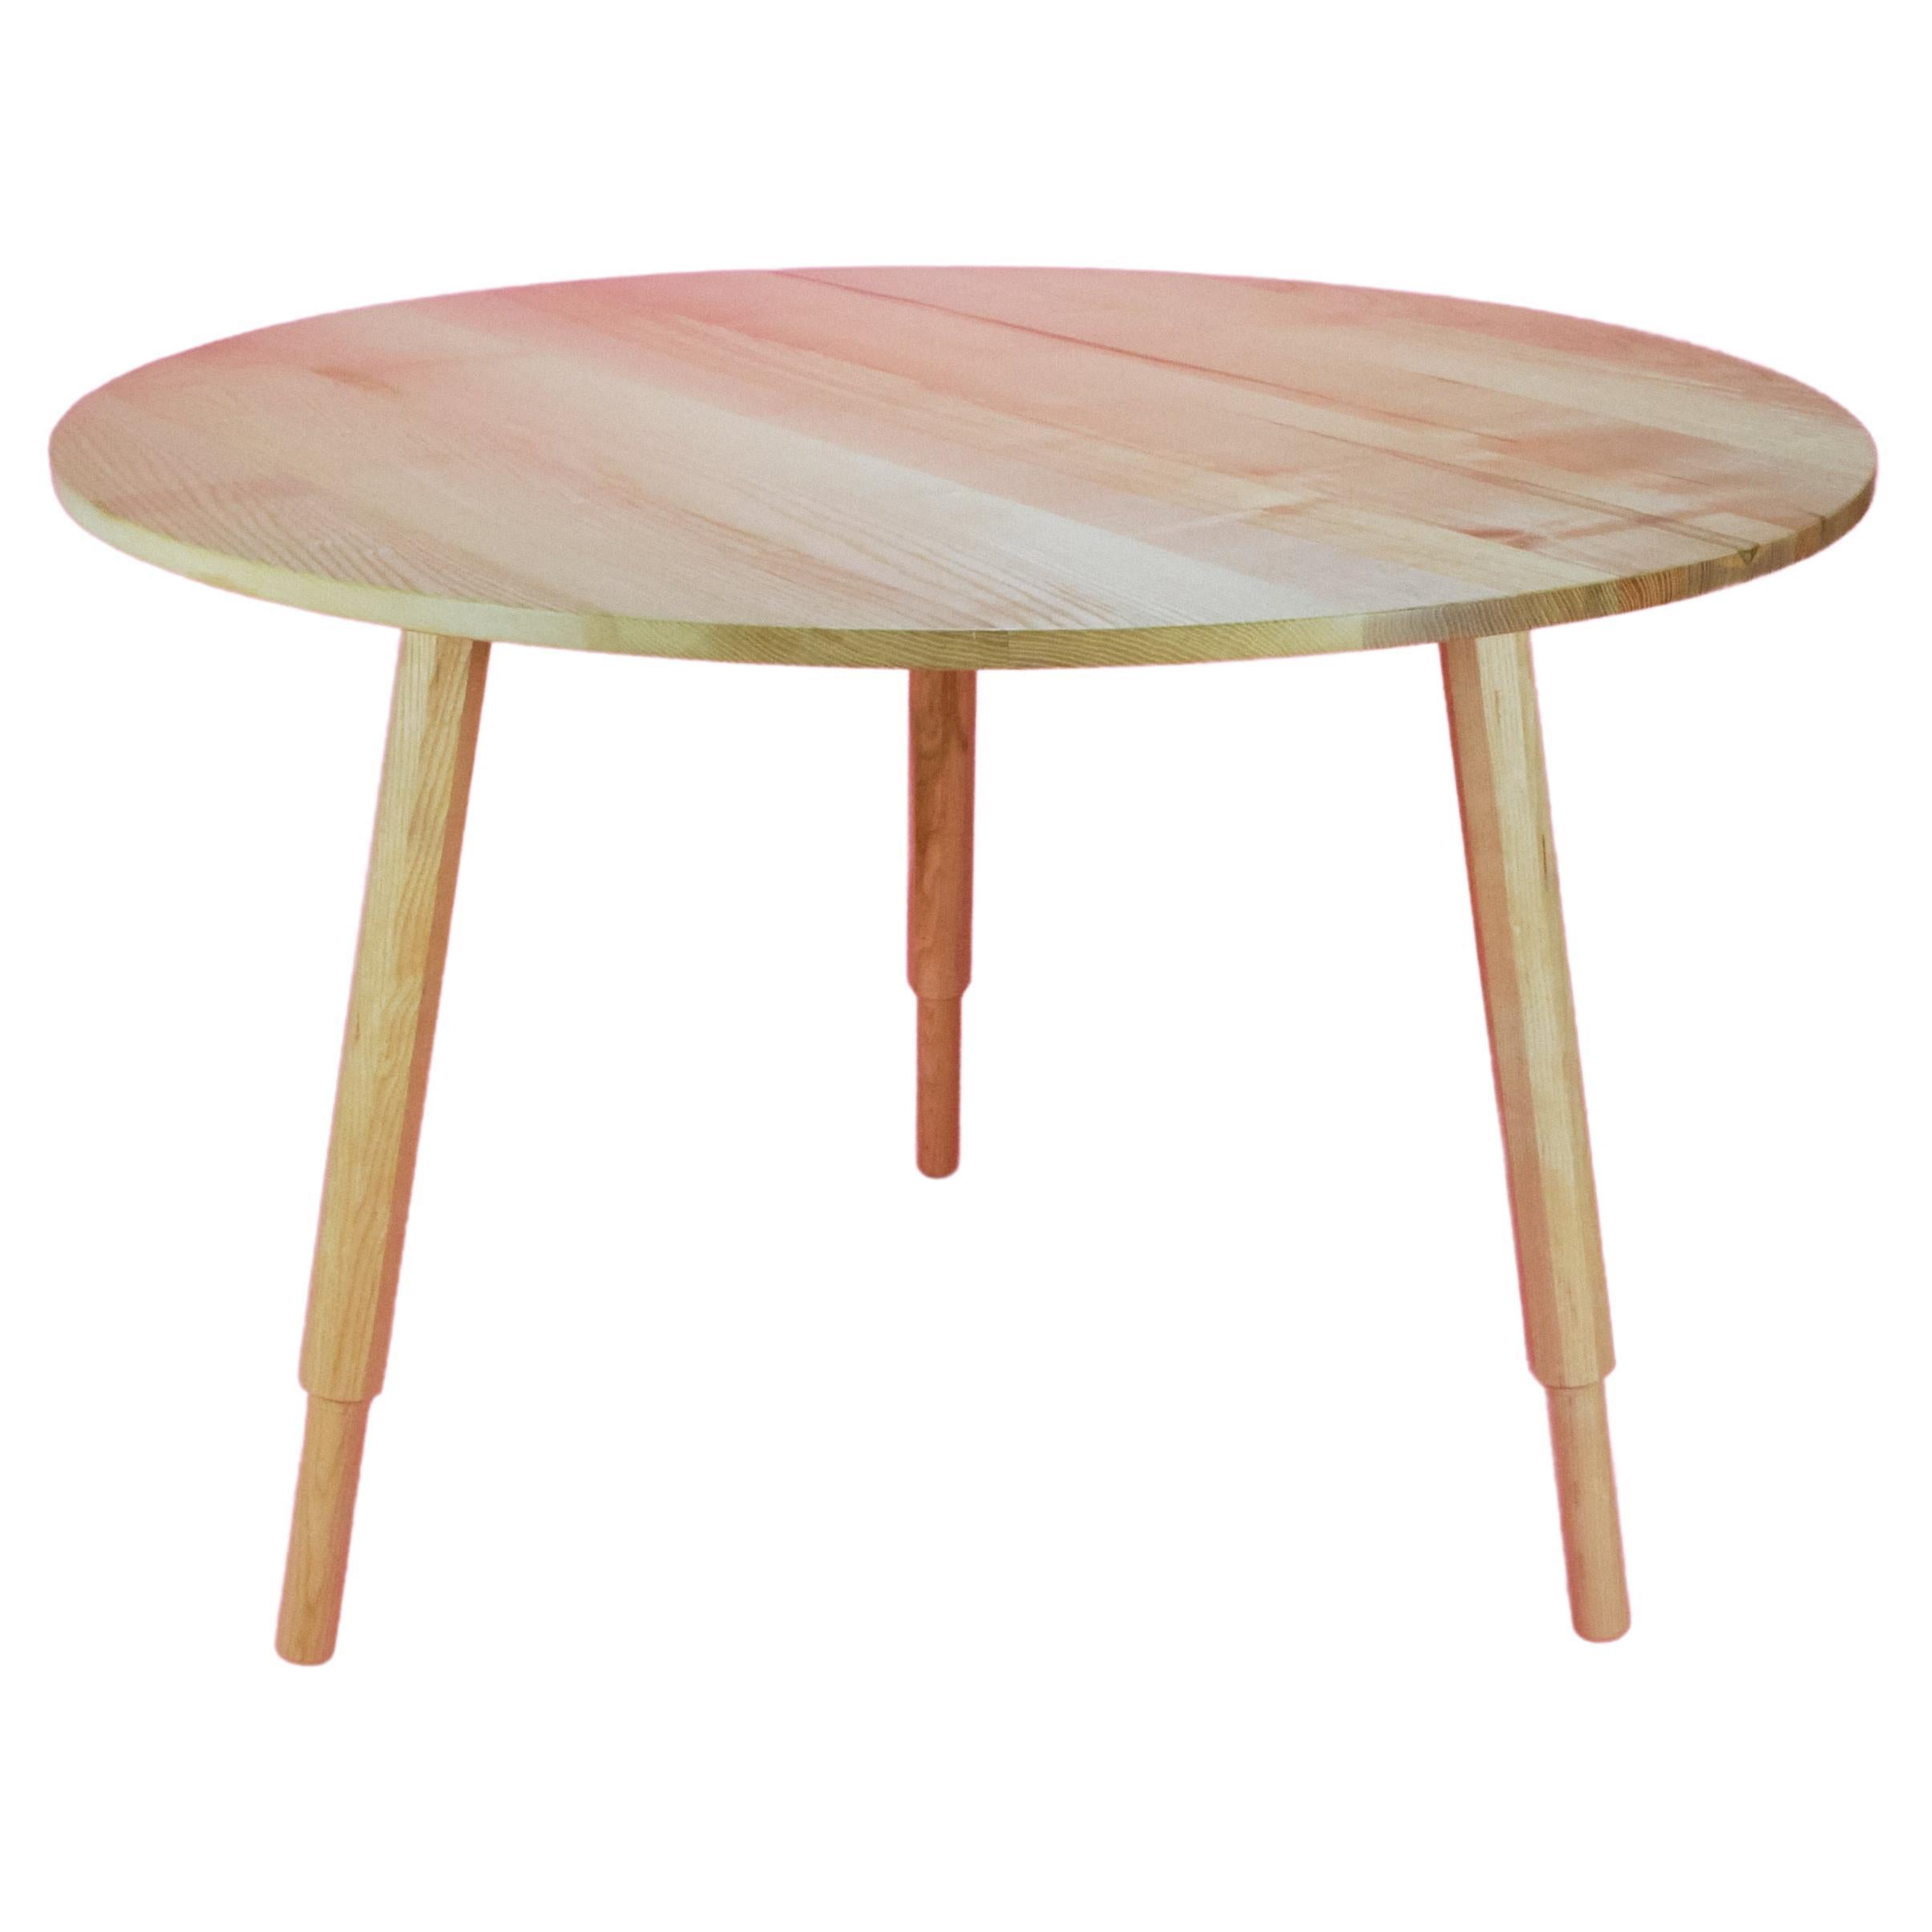 Round Dining Table with Screw in Legs Solid English Ash Wood Handmade in the UK